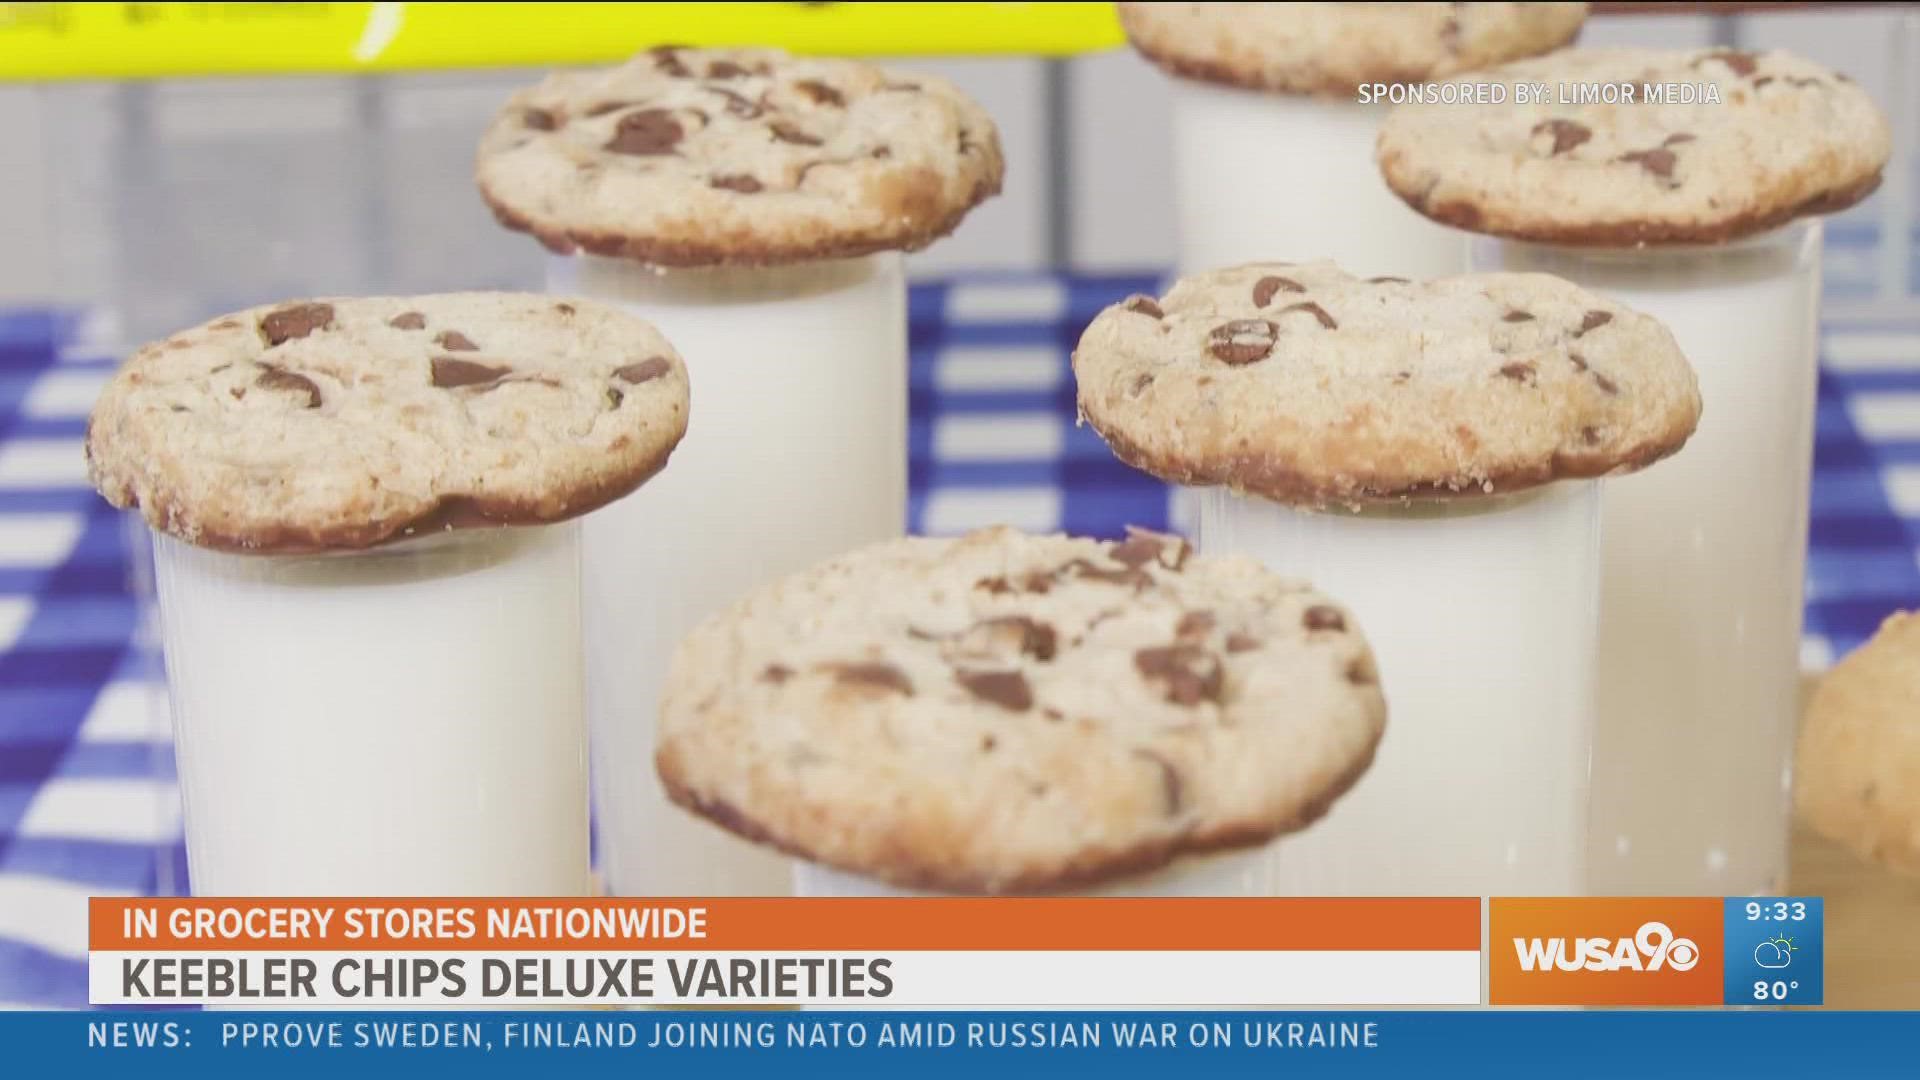 Lifestyle Expert Limor Suss shares her favorite cookie brands to enjoy for National Chocolate Chip Cookie Day. Sponsored by Limor Media.